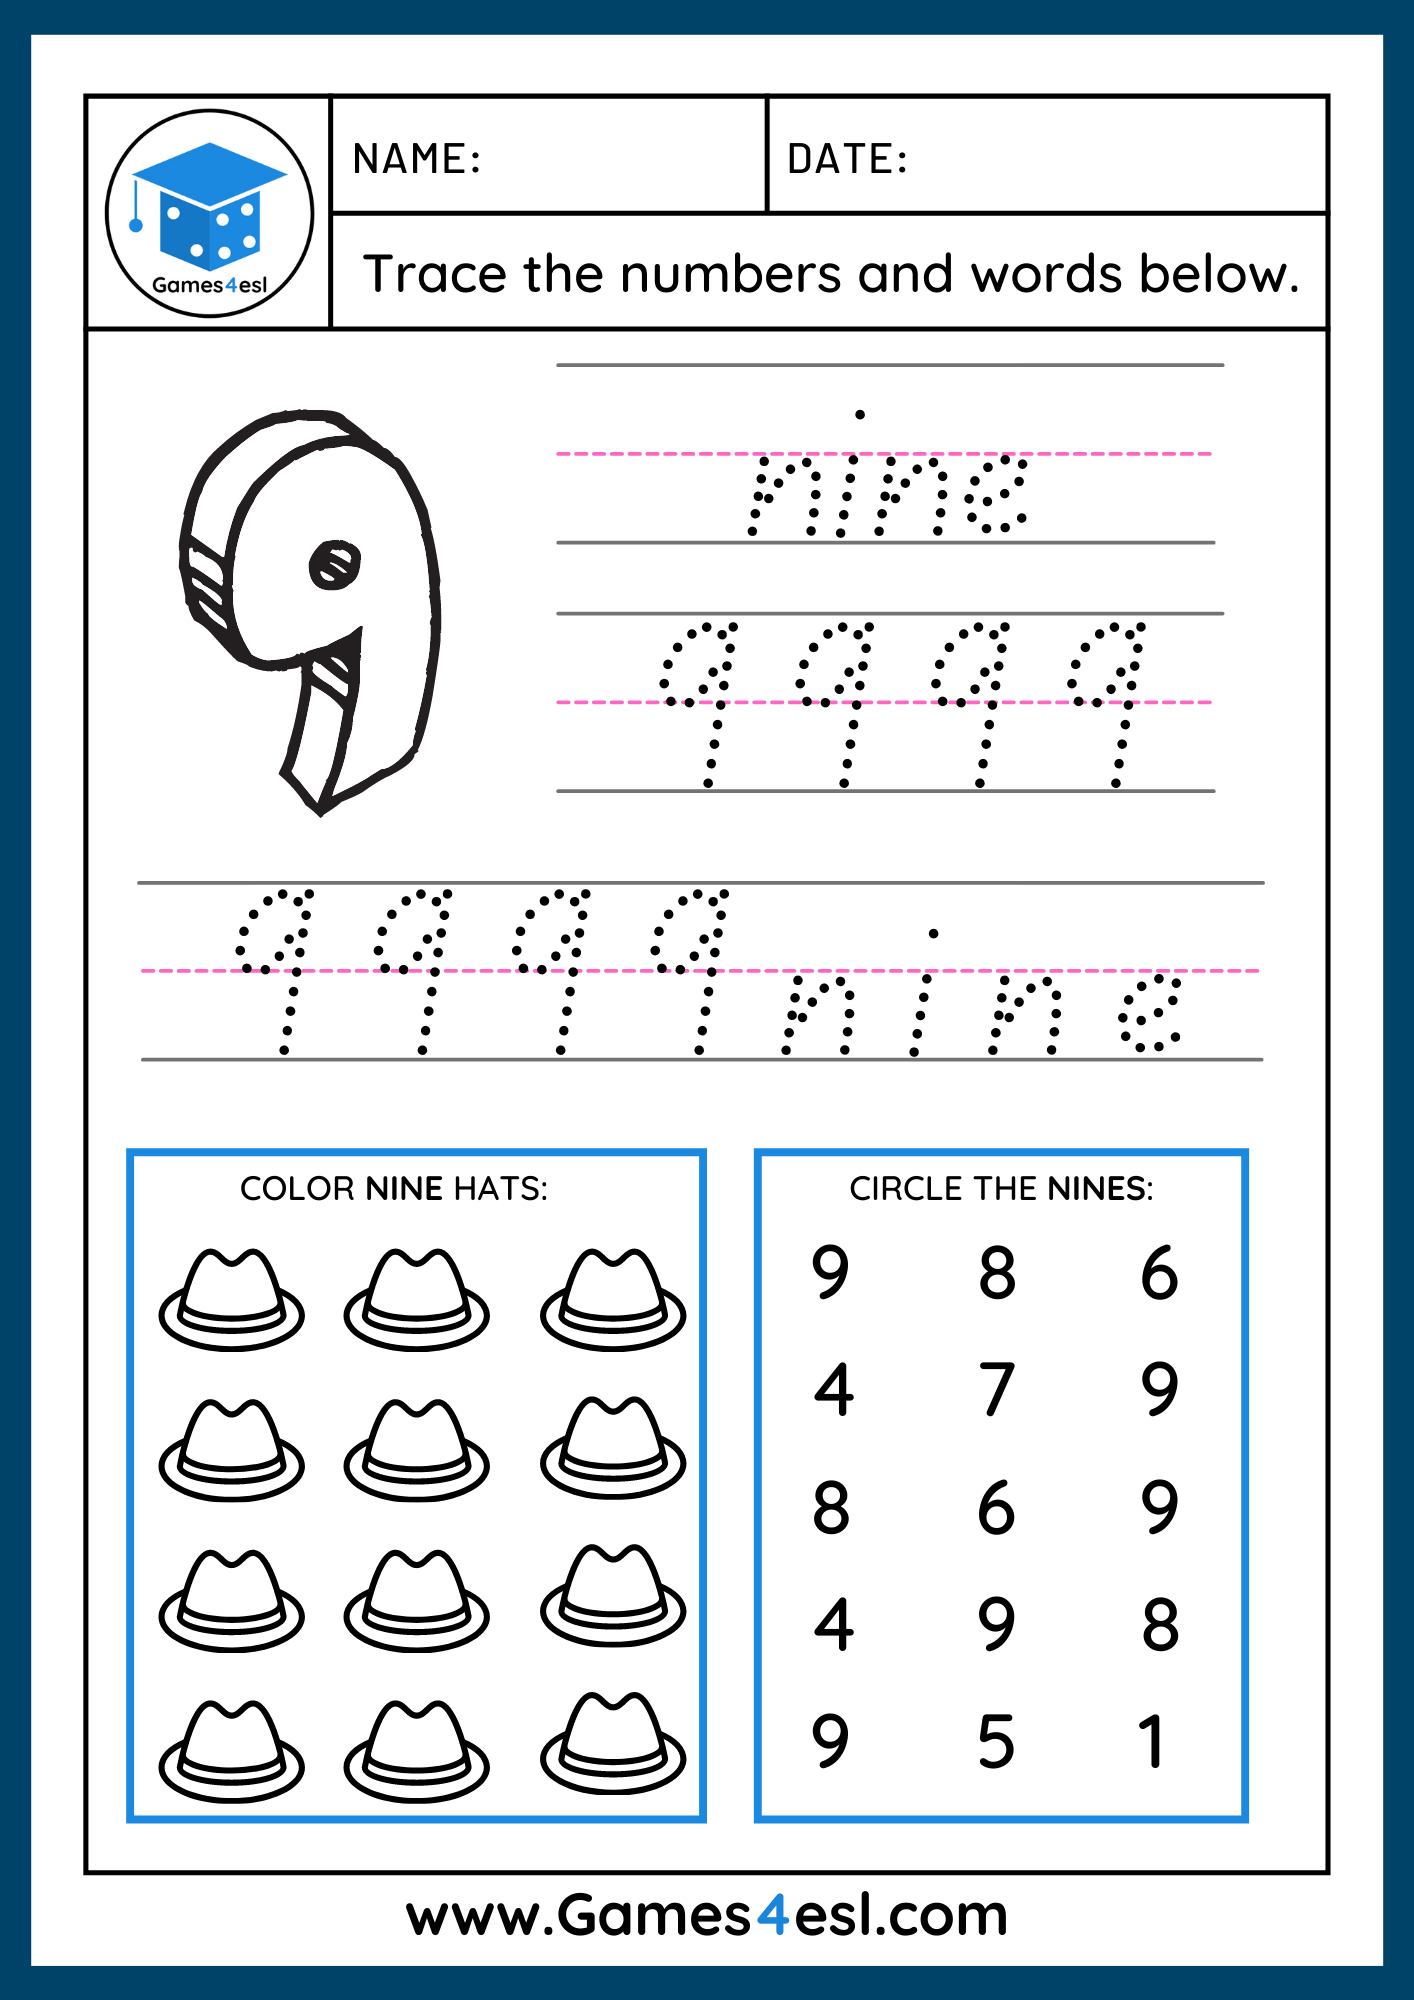 31 Creative Number Tracing Worksheets 22